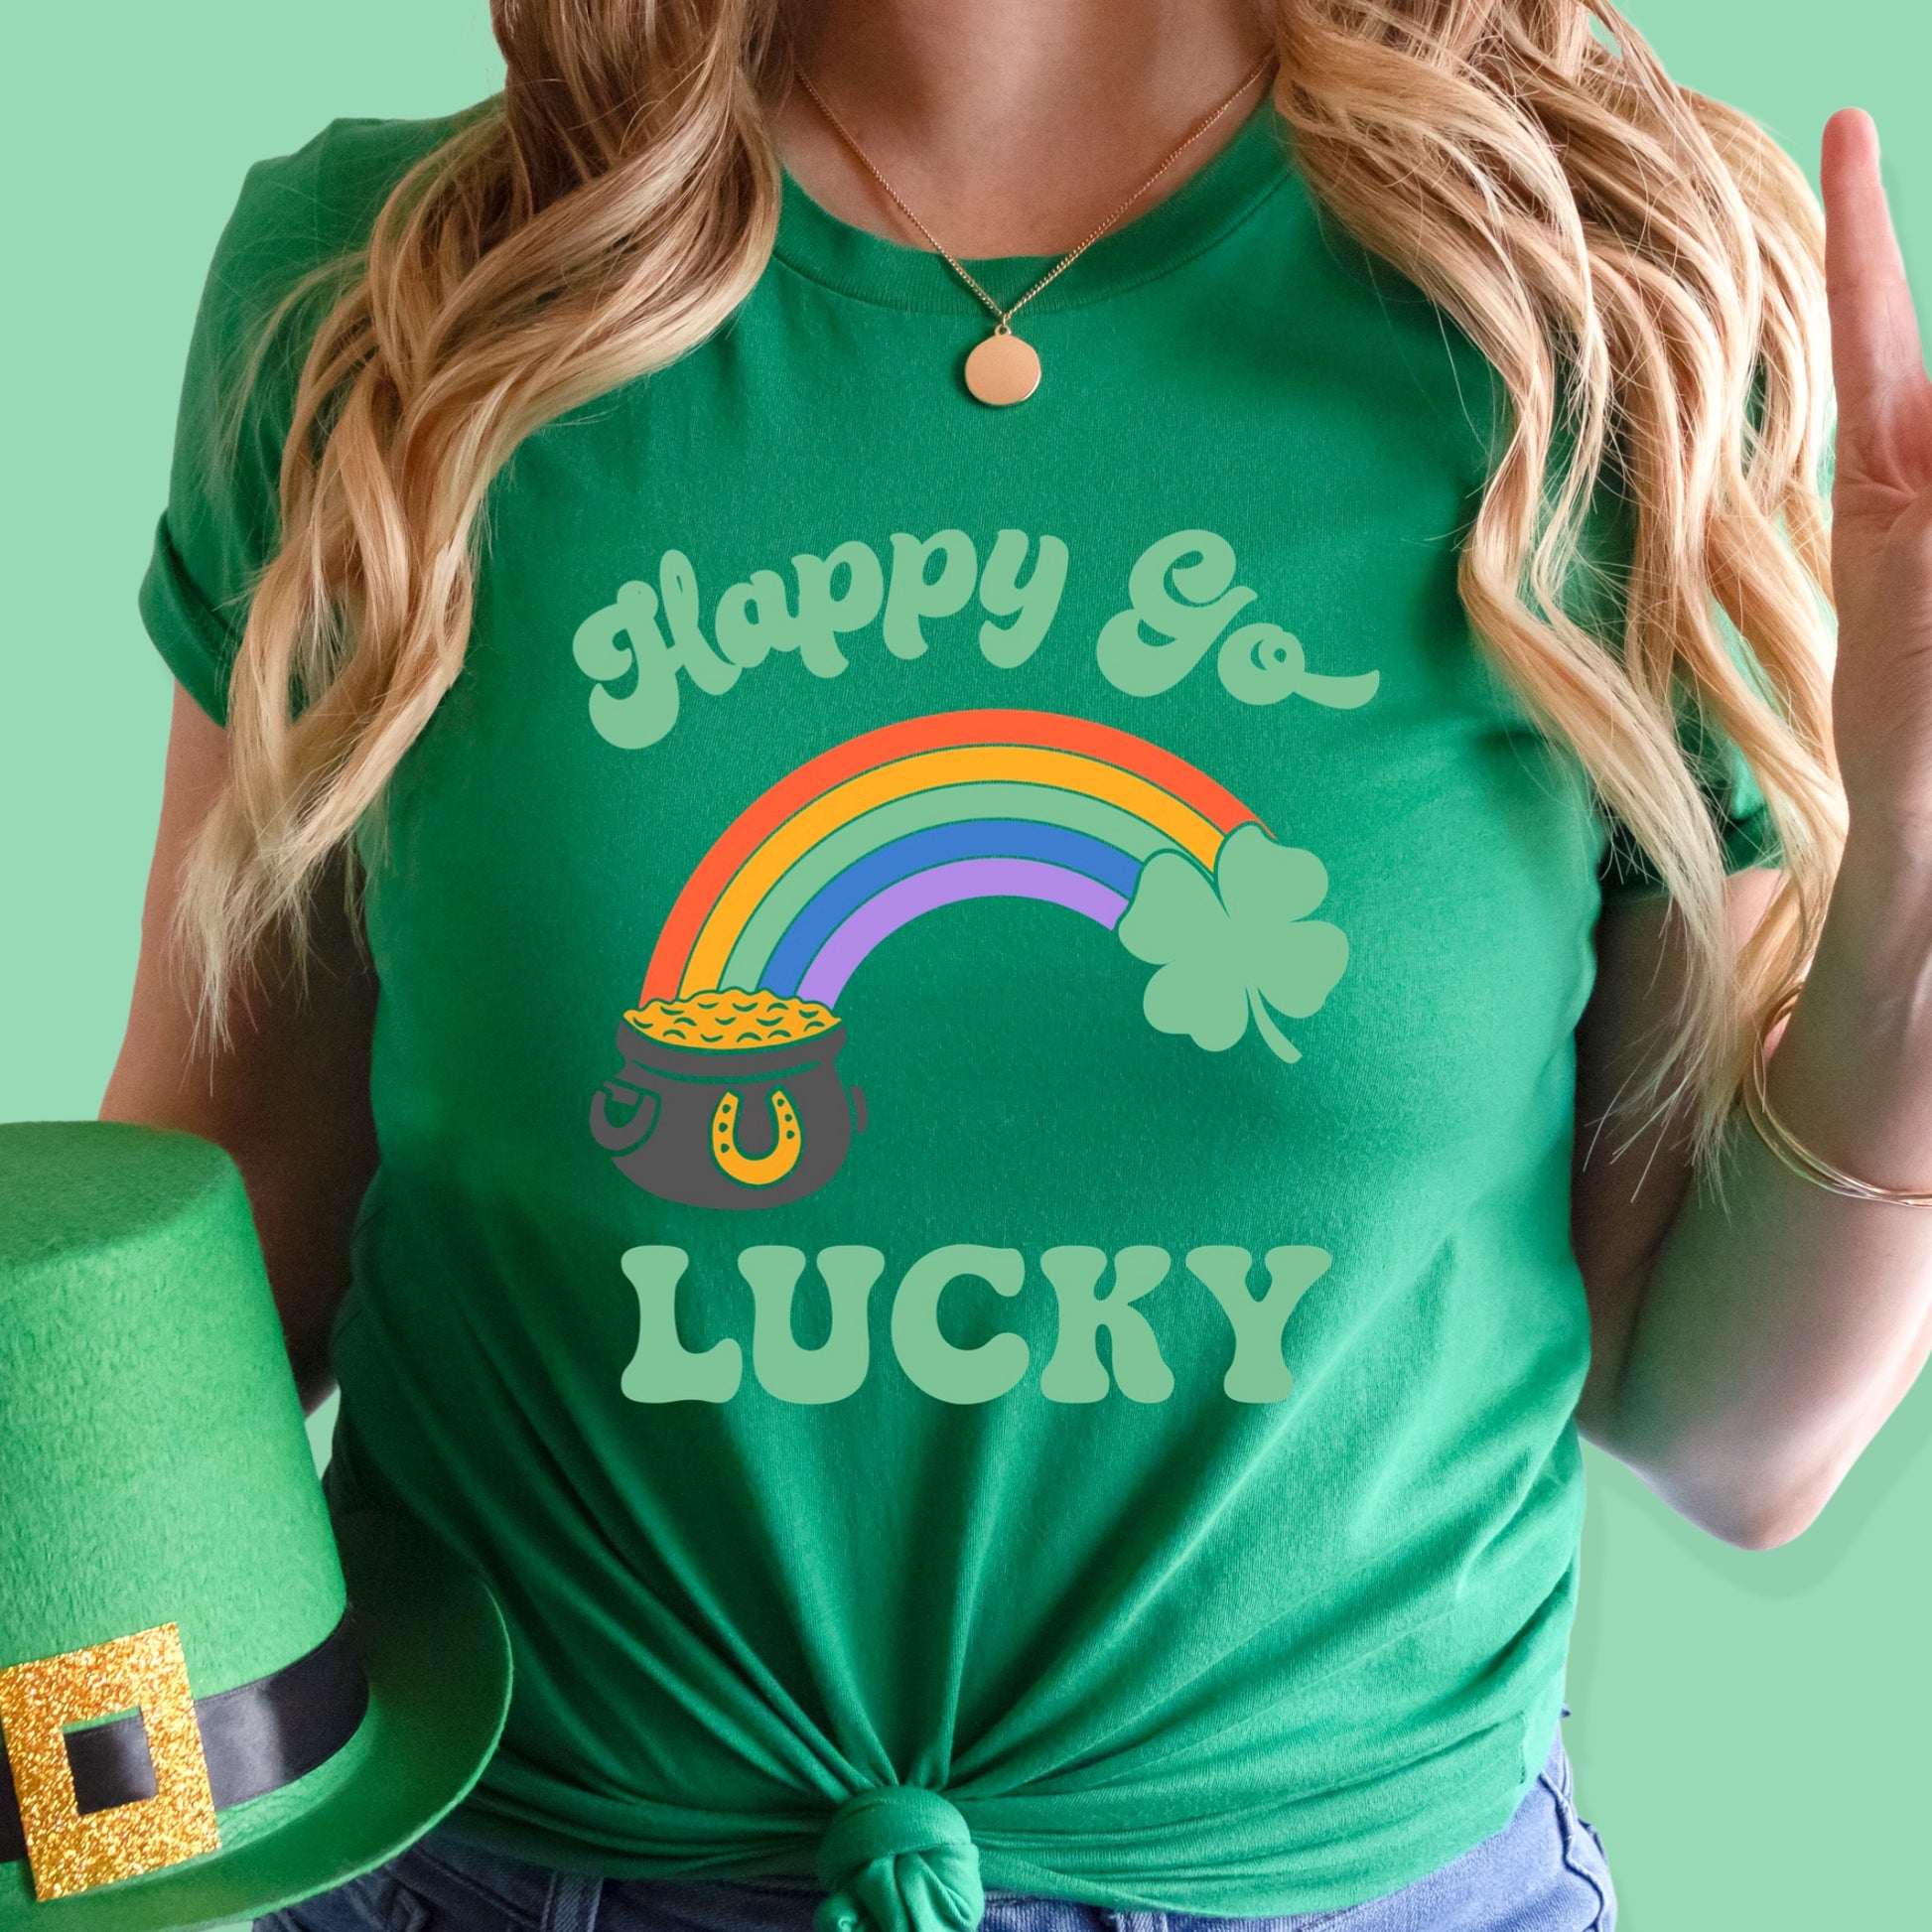 St. Patrick's day green iron on transfer with a pot of gold, rainbow, clover, and the phrase "Happy Go Lucky"